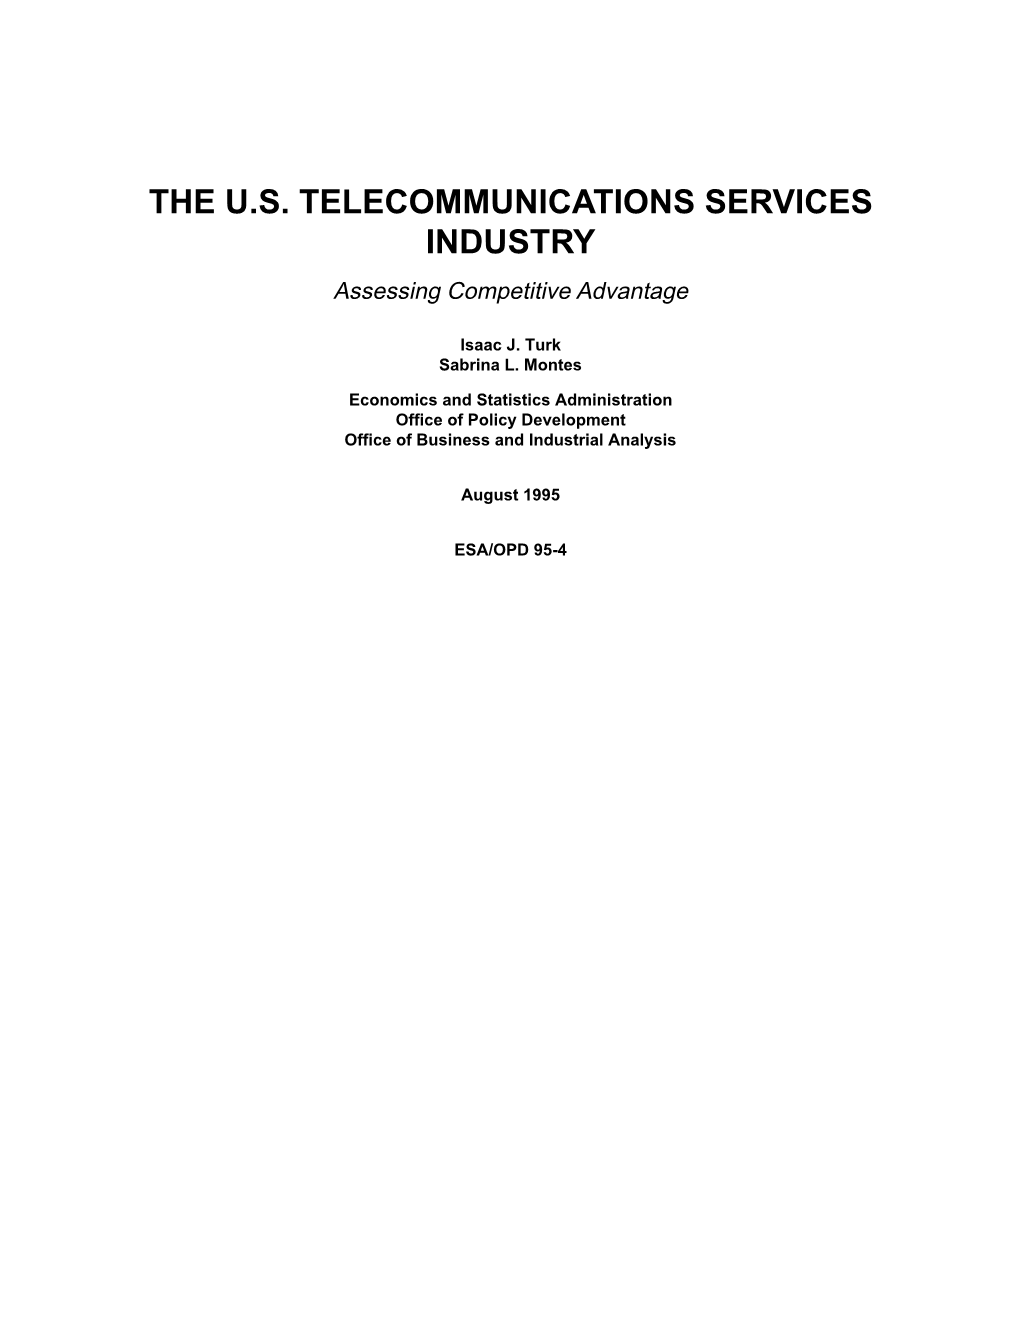 The US Telecommunications Services Industry: Assessing Competitive